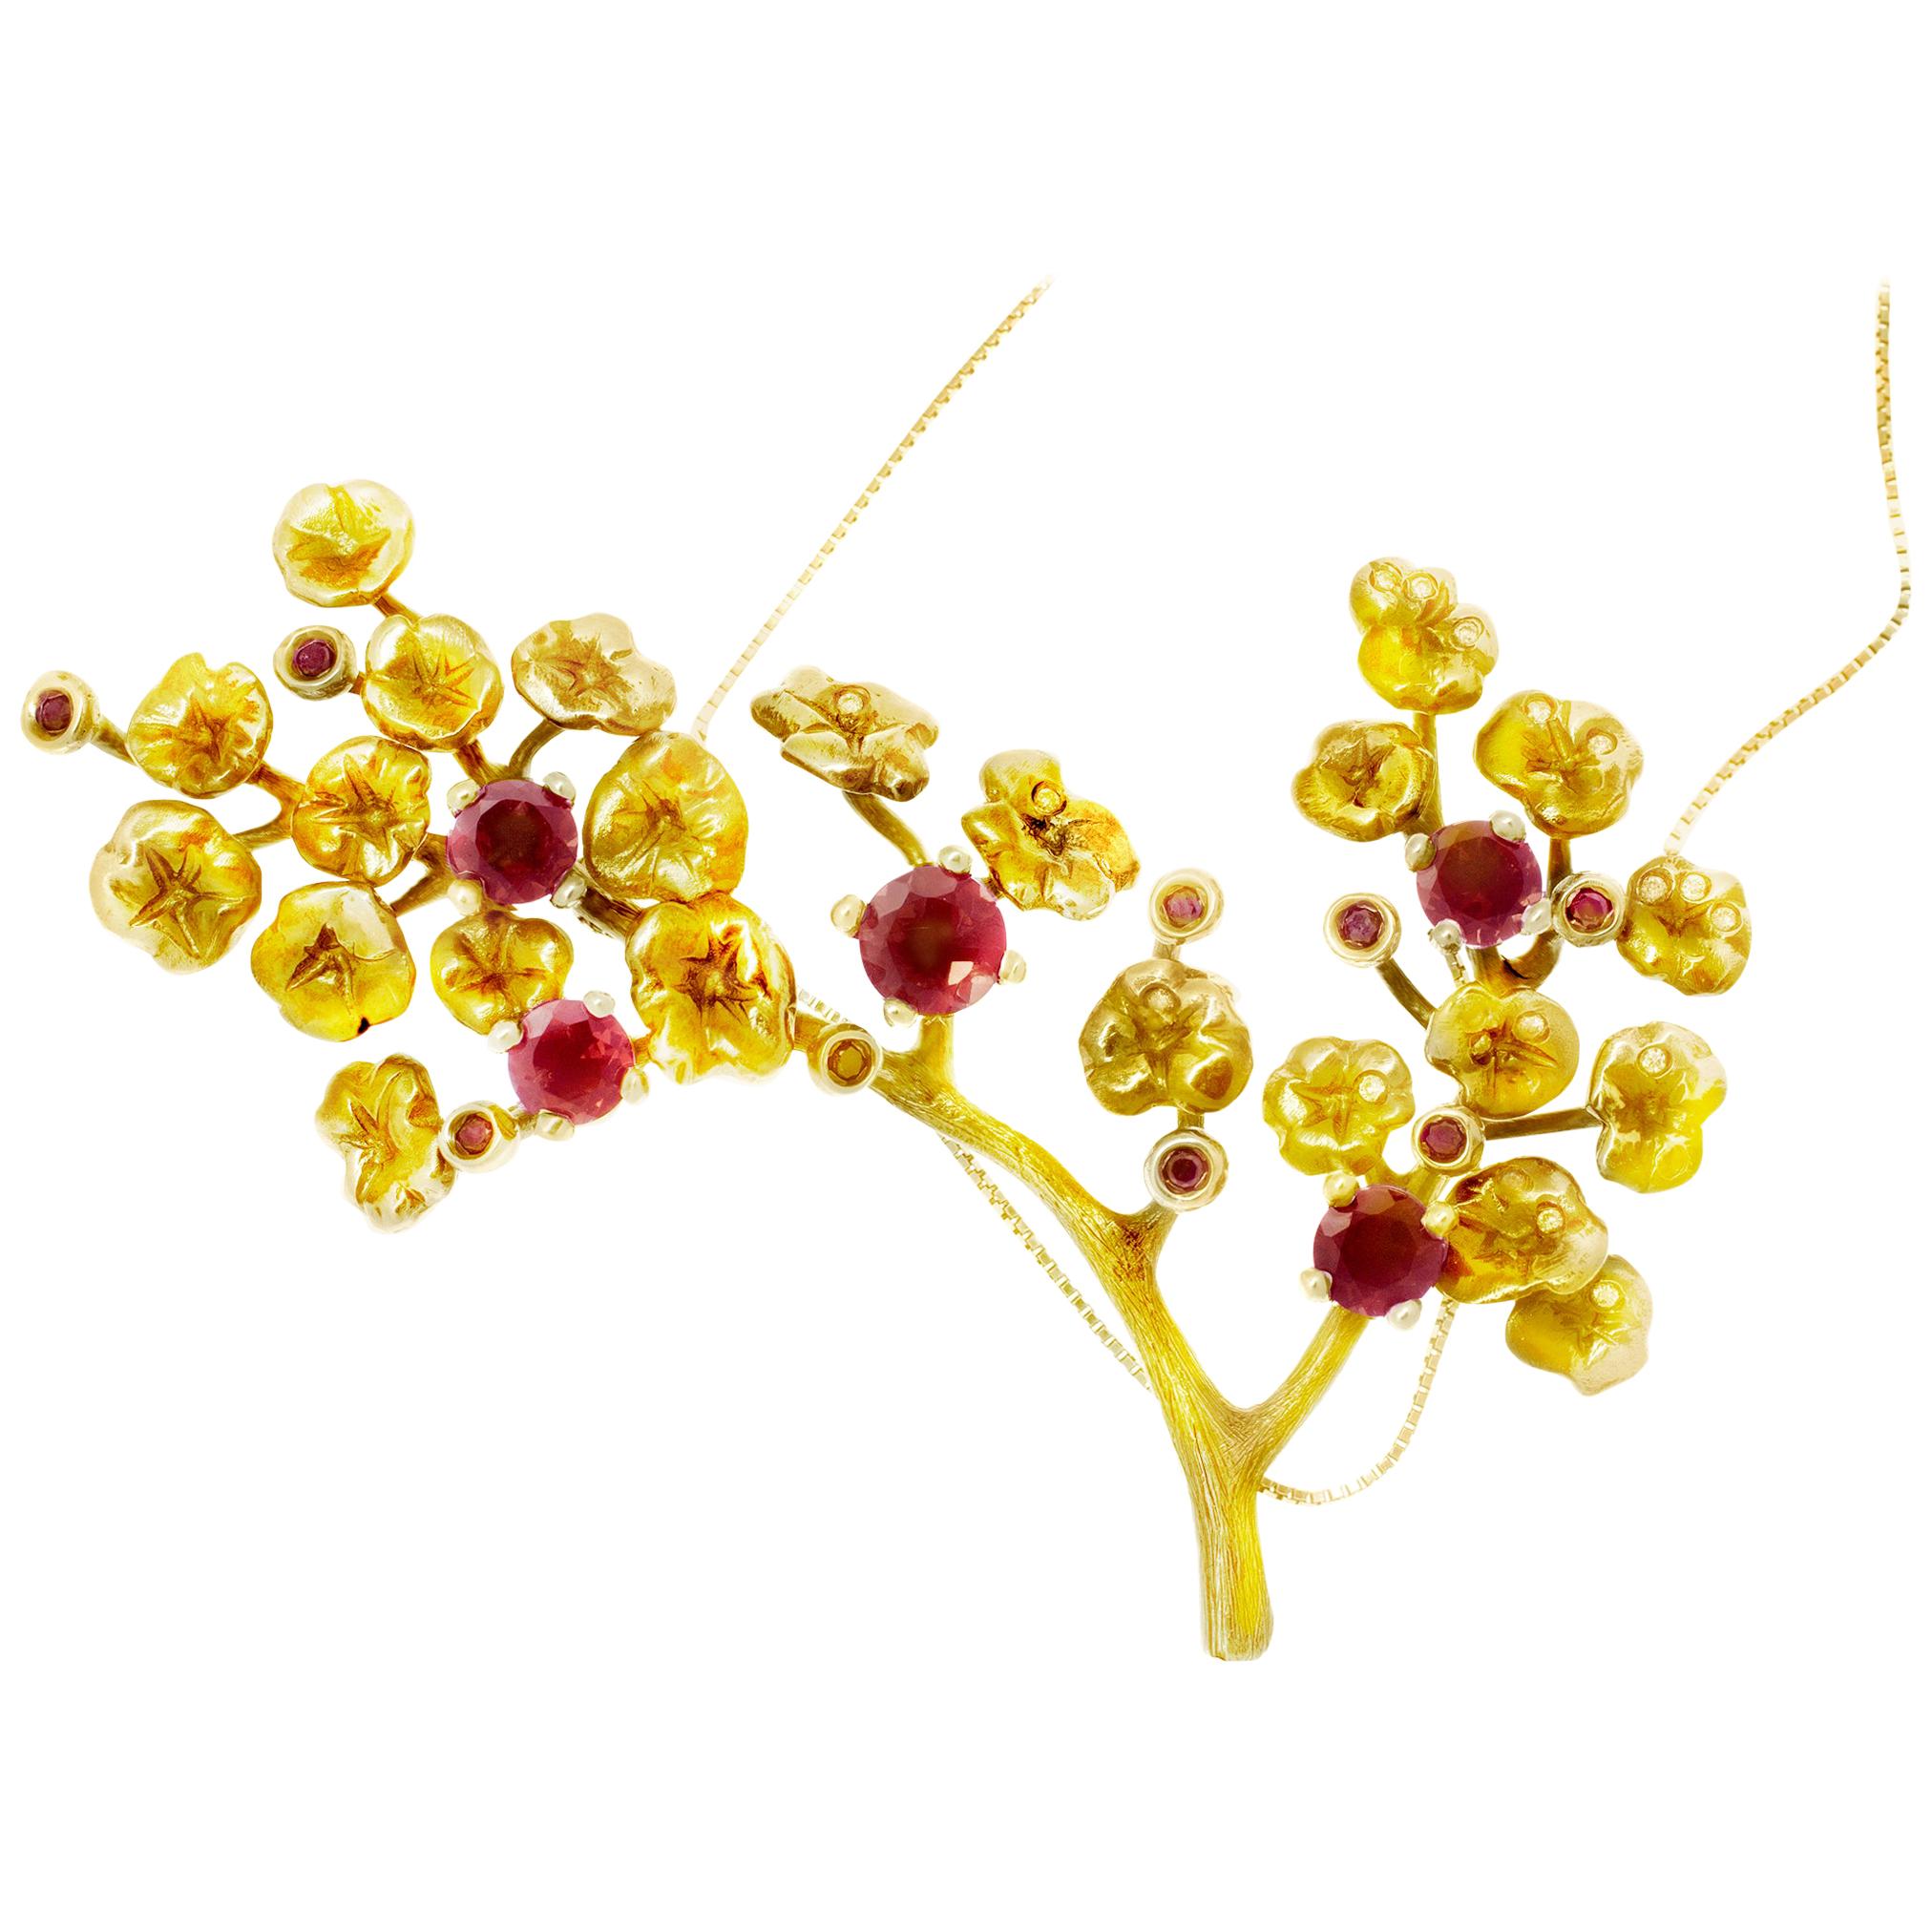 Eighteen Karat Gold Heliotrope Necklace with Rubies and Diamonds